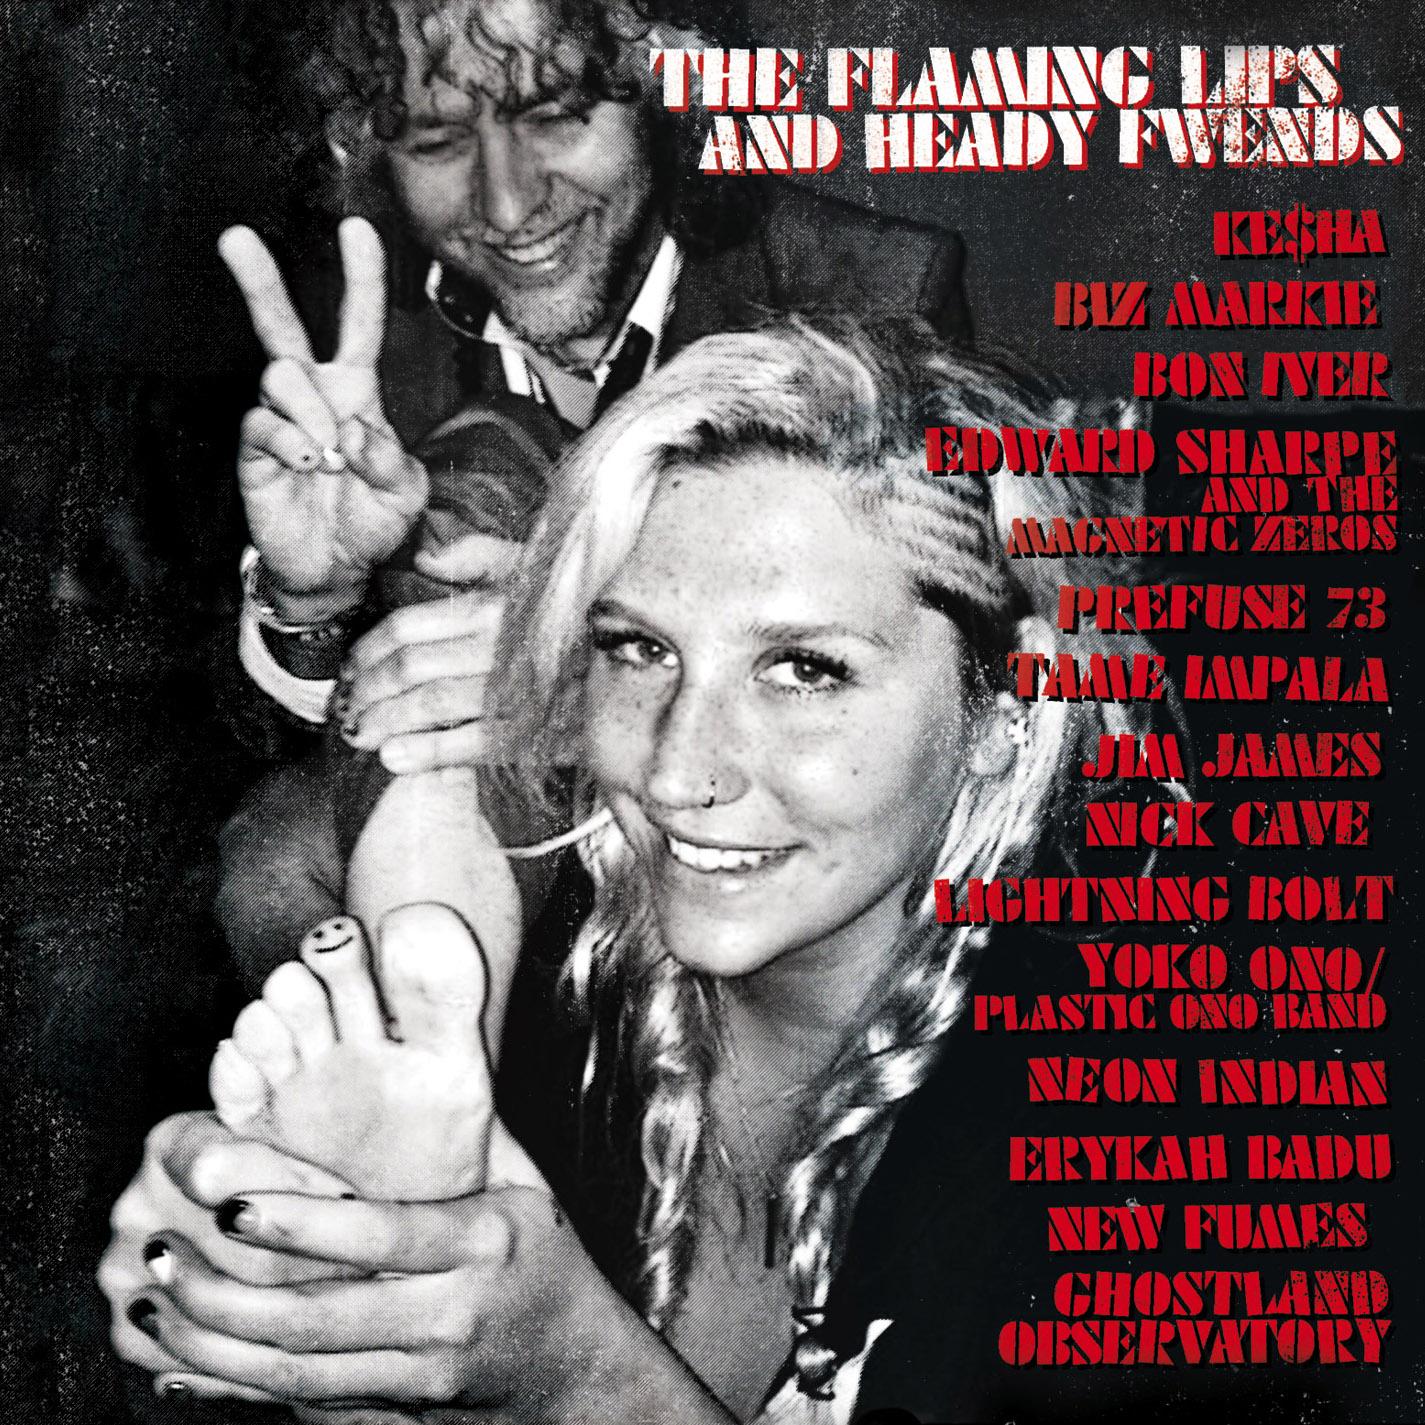 The Flaming Lips, "The Flaming Lips and Awesome Fwends"